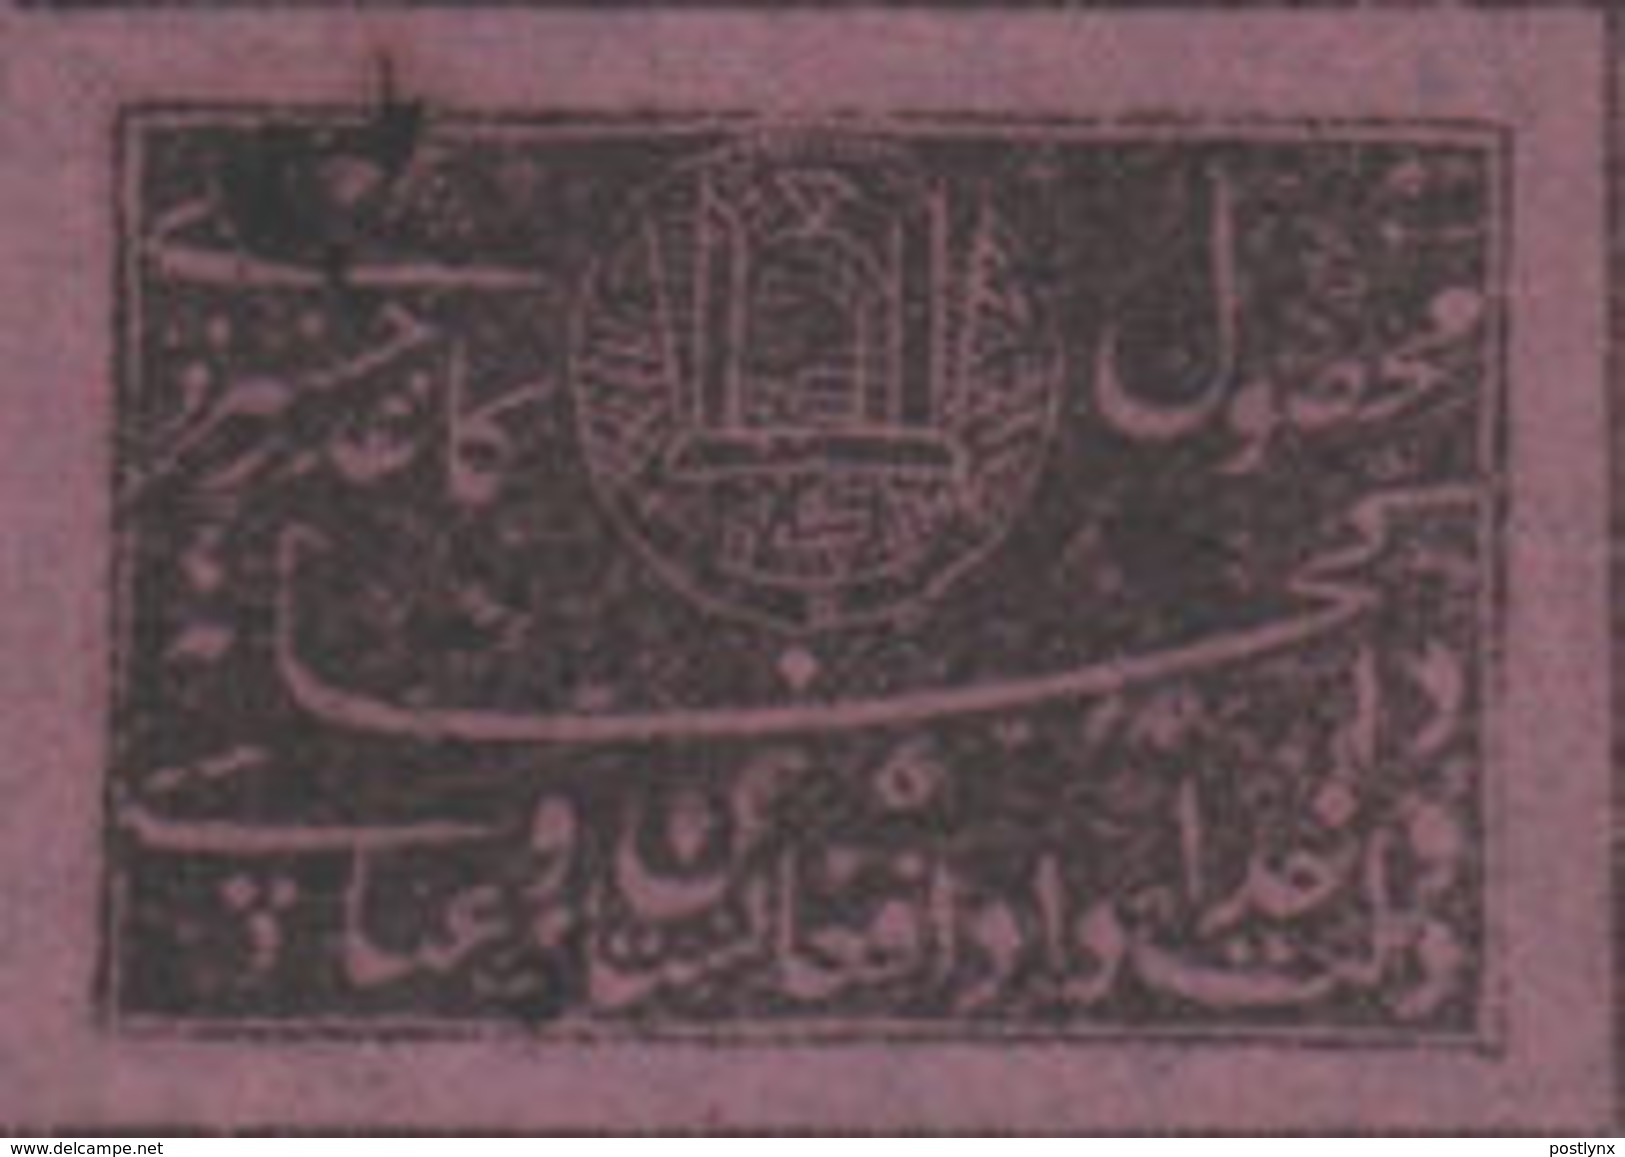 AFGHANISTAN 1898 Mosque Flags Islam Black 2a  Lilac Pp. REGISTERED STAMP UNISSUED-BUT PLANNED - Afghanistan